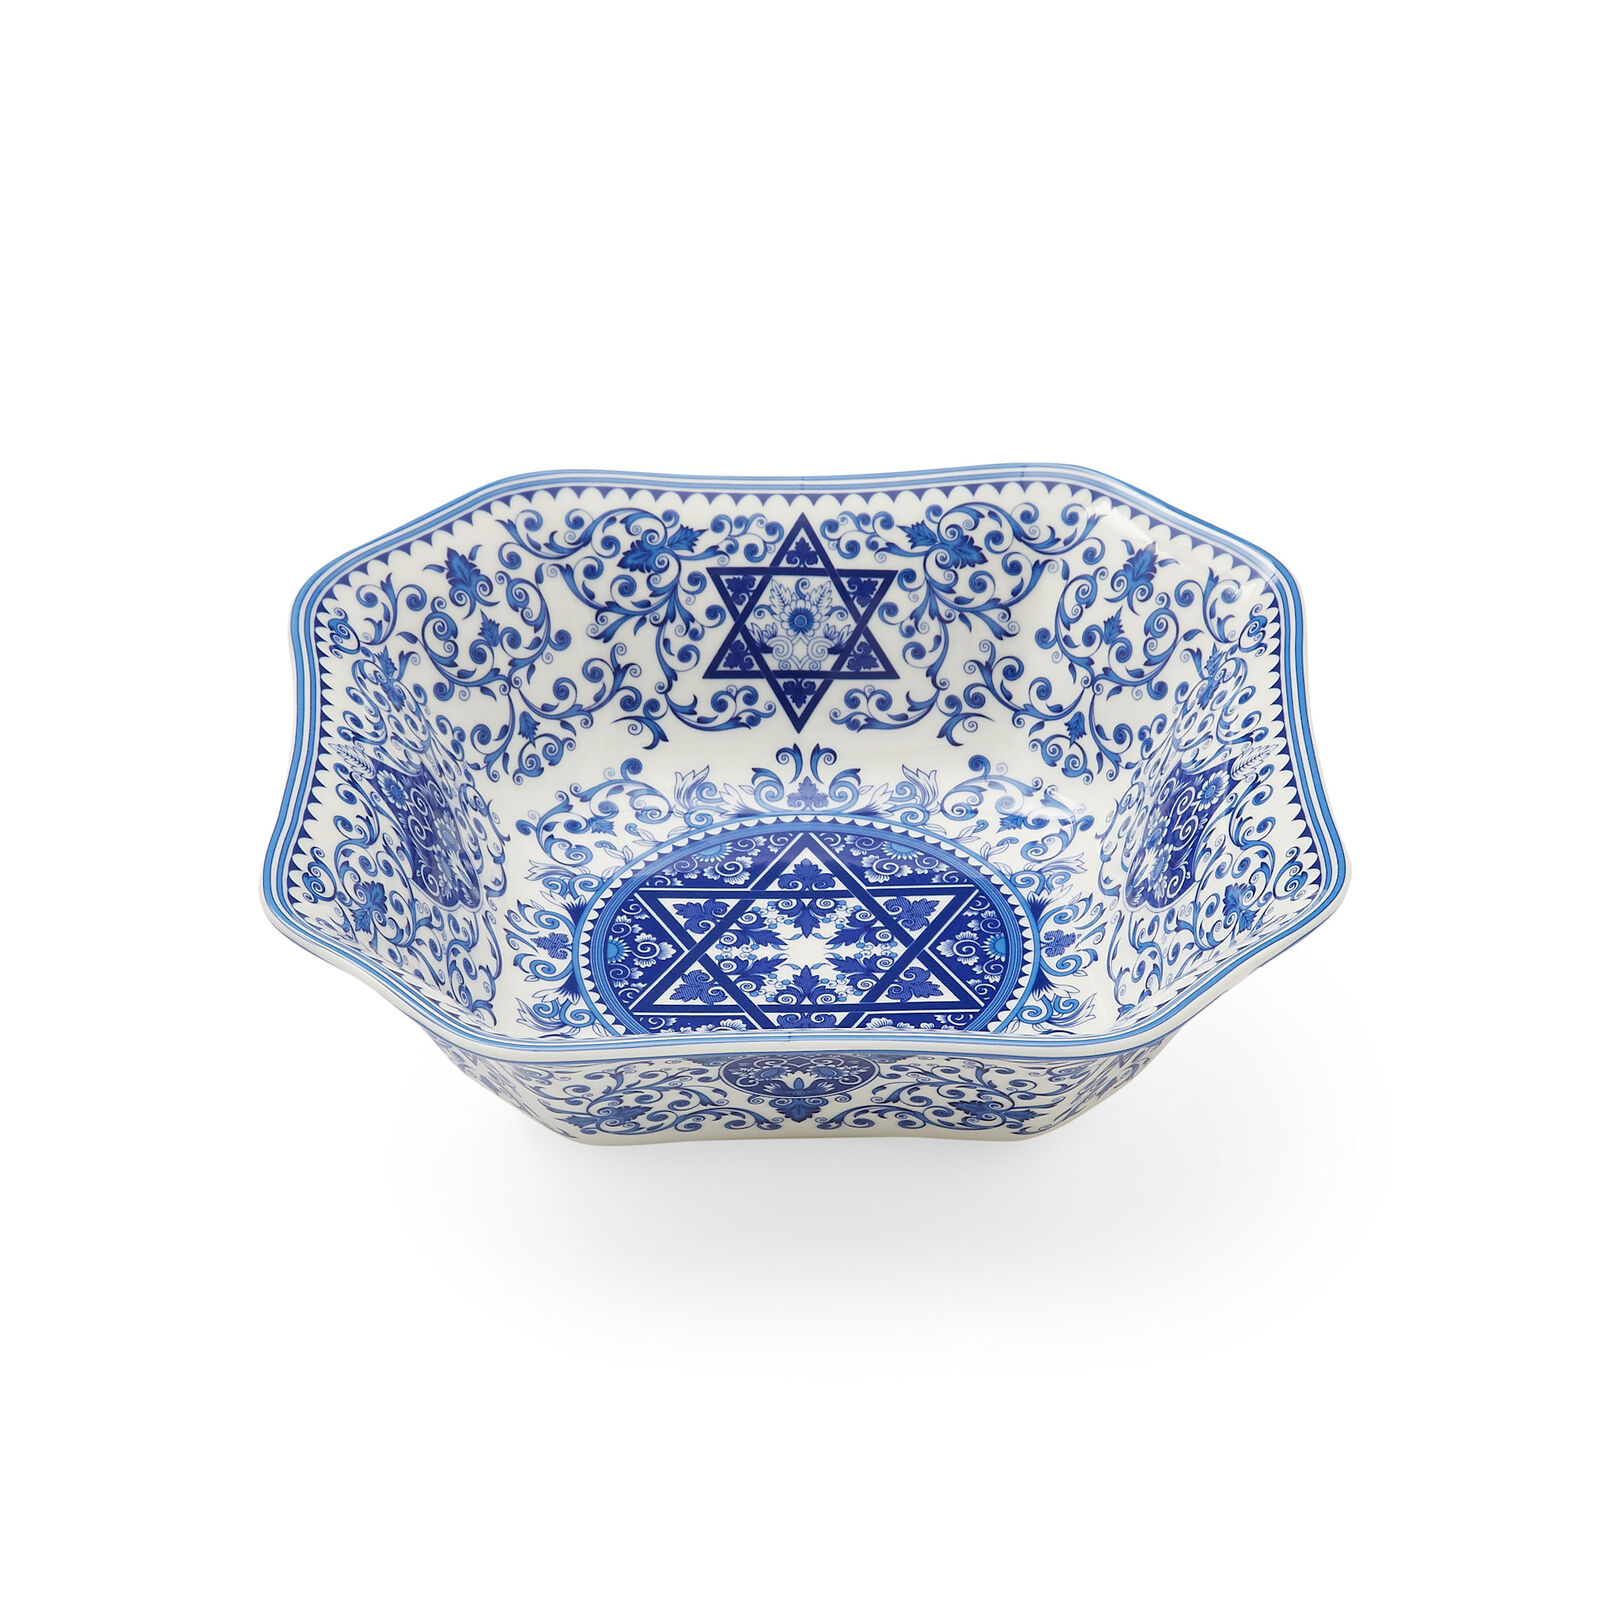 Spode Judaica Serving Dish for Shabbat Dinner and Jewish Holidays 9.25 Inch